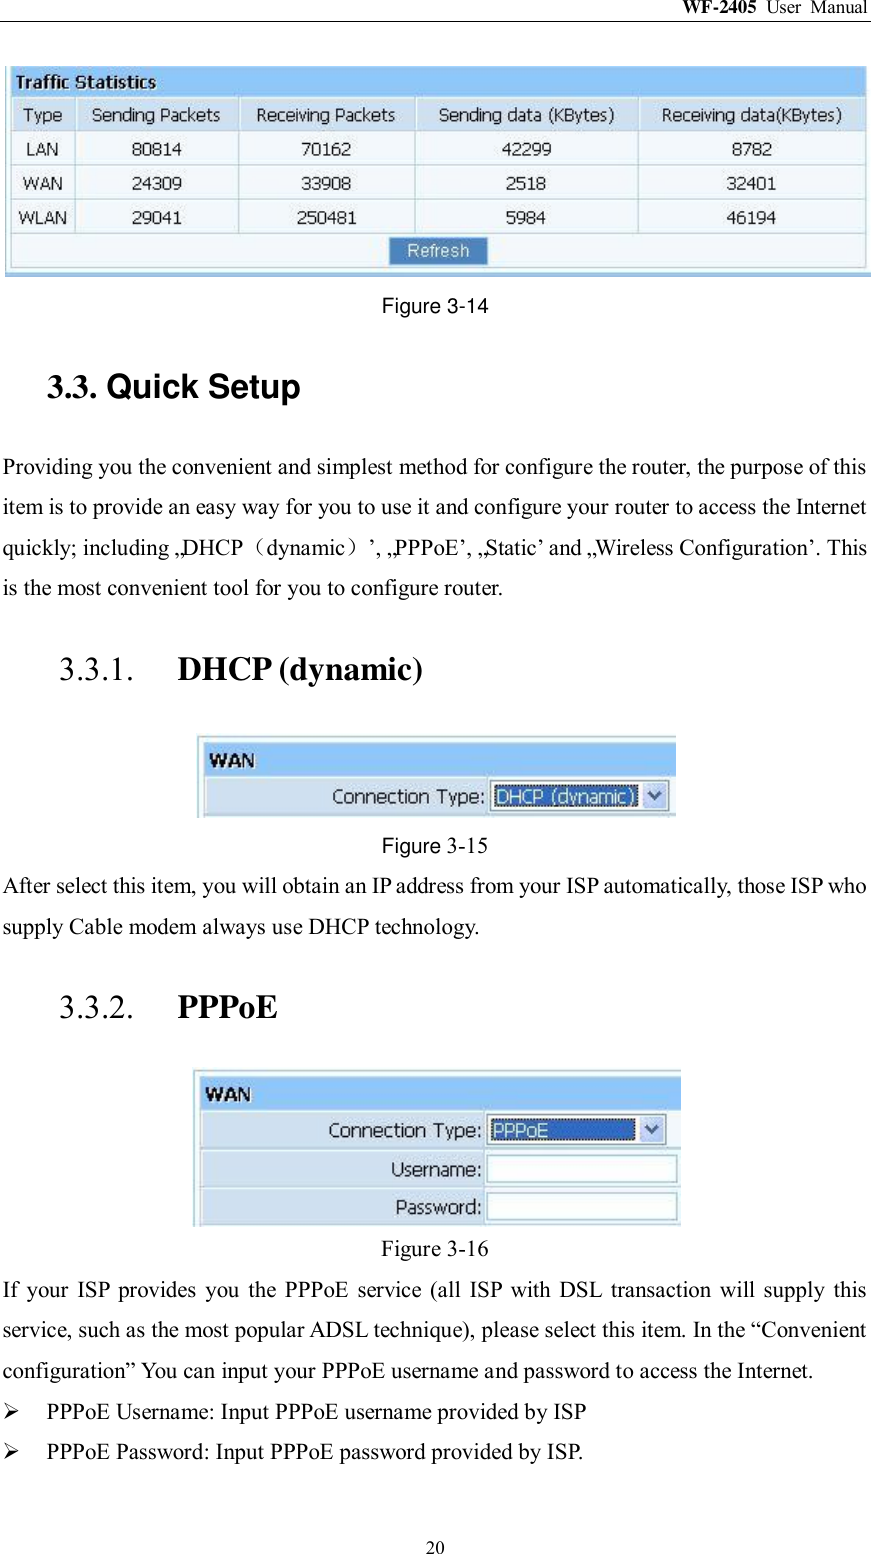 WF-2405  User  Manual  20  Figure 3-14 3.3. Quick Setup Providing you the convenient and simplest method for configure the router, the purpose of this item is to provide an easy way for you to use it and configure your router to access the Internet quickly; including „DHCP（dynamic）‟, „PPPoE‟, „Static‟ and „Wireless Configuration‟. This is the most convenient tool for you to configure router. 3.3.1. DHCP (dynamic)  Figure 3-15 After select this item, you will obtain an IP address from your ISP automatically, those ISP who supply Cable modem always use DHCP technology. 3.3.2. PPPoE    Figure 3-16 If  your  ISP  provides  you  the  PPPoE  service  (all  ISP with  DSL  transaction  will  supply  this service, such as the most popular ADSL technique), please select this item. In the “Convenient configuration” You can input your PPPoE username and password to access the Internet.  PPPoE Username: Input PPPoE username provided by ISP  PPPoE Password: Input PPPoE password provided by ISP. 